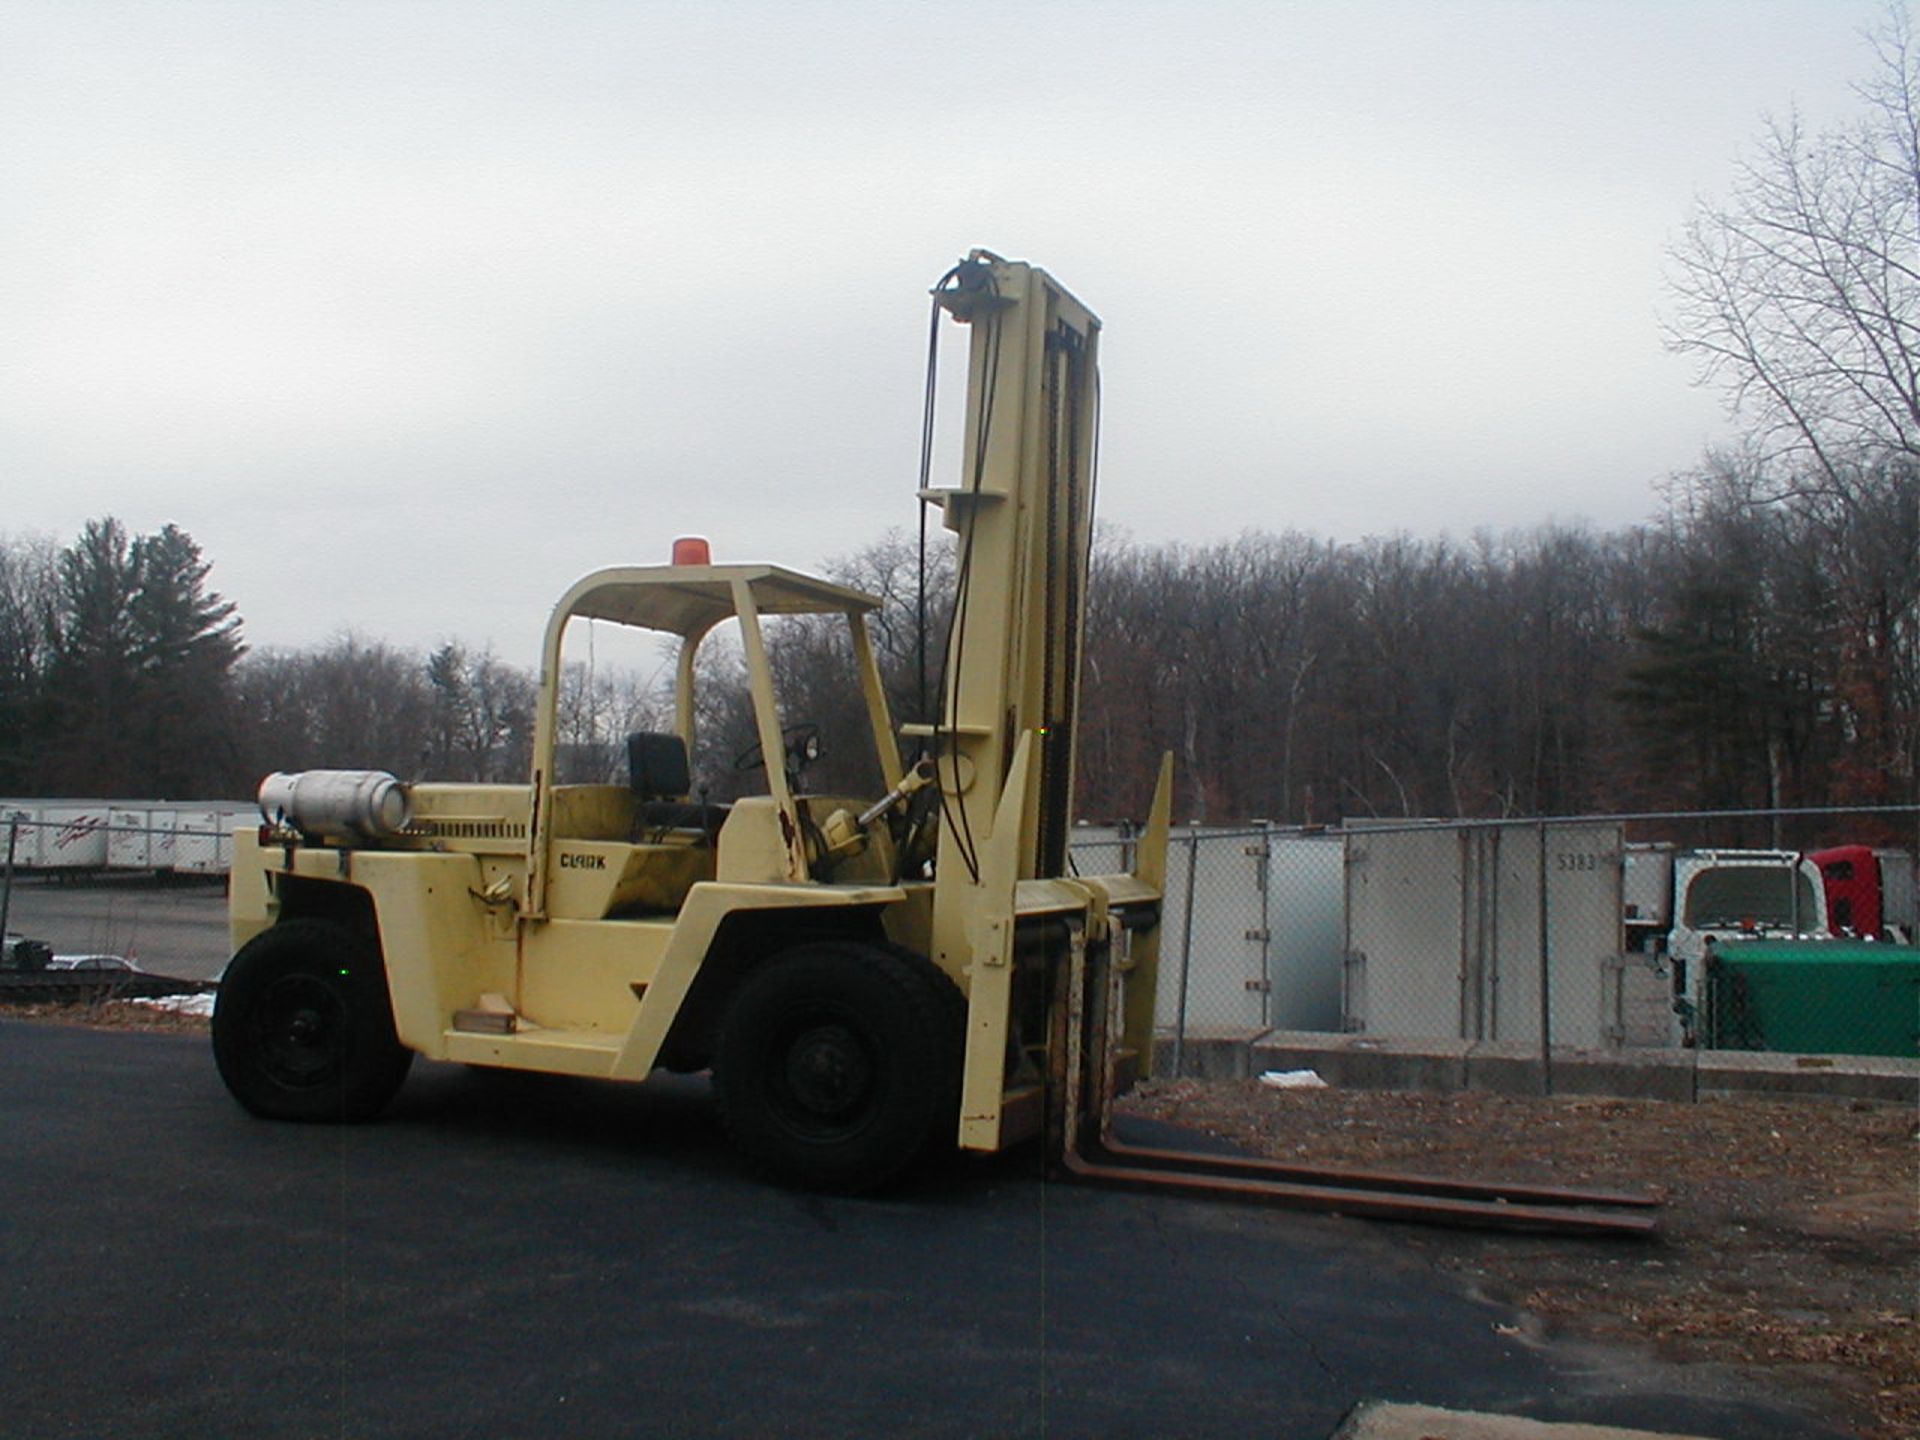 Clark CHY160-250, 25,000# capacity forklift, LPG powered, 2 stage mast, fork attachment, 8' forks, 6